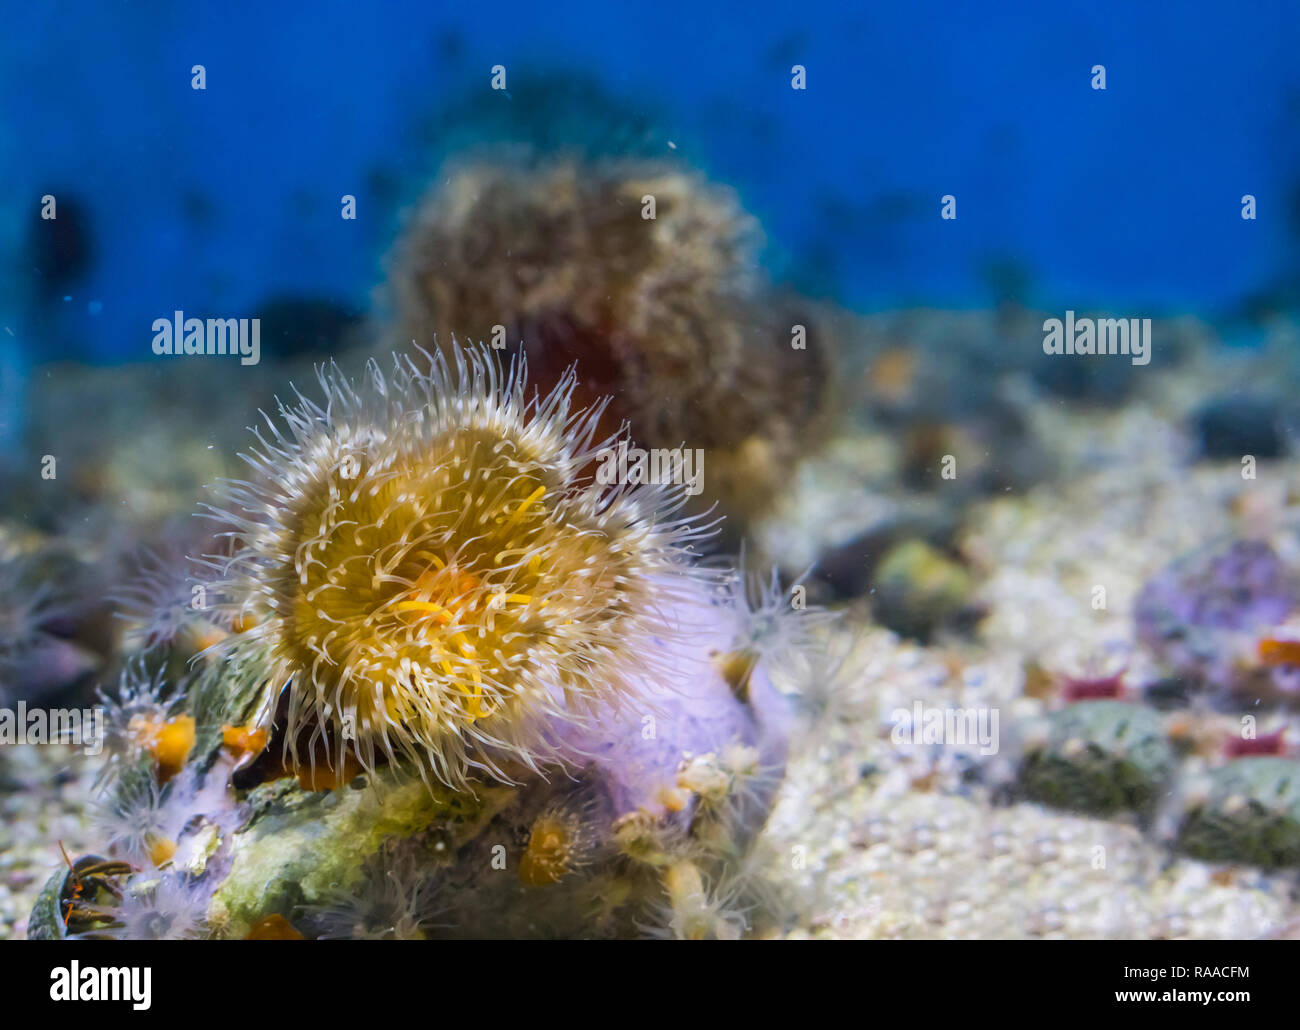 closeup of a plumose sea anemone with yellow and white colors, marine life background Stock Photo